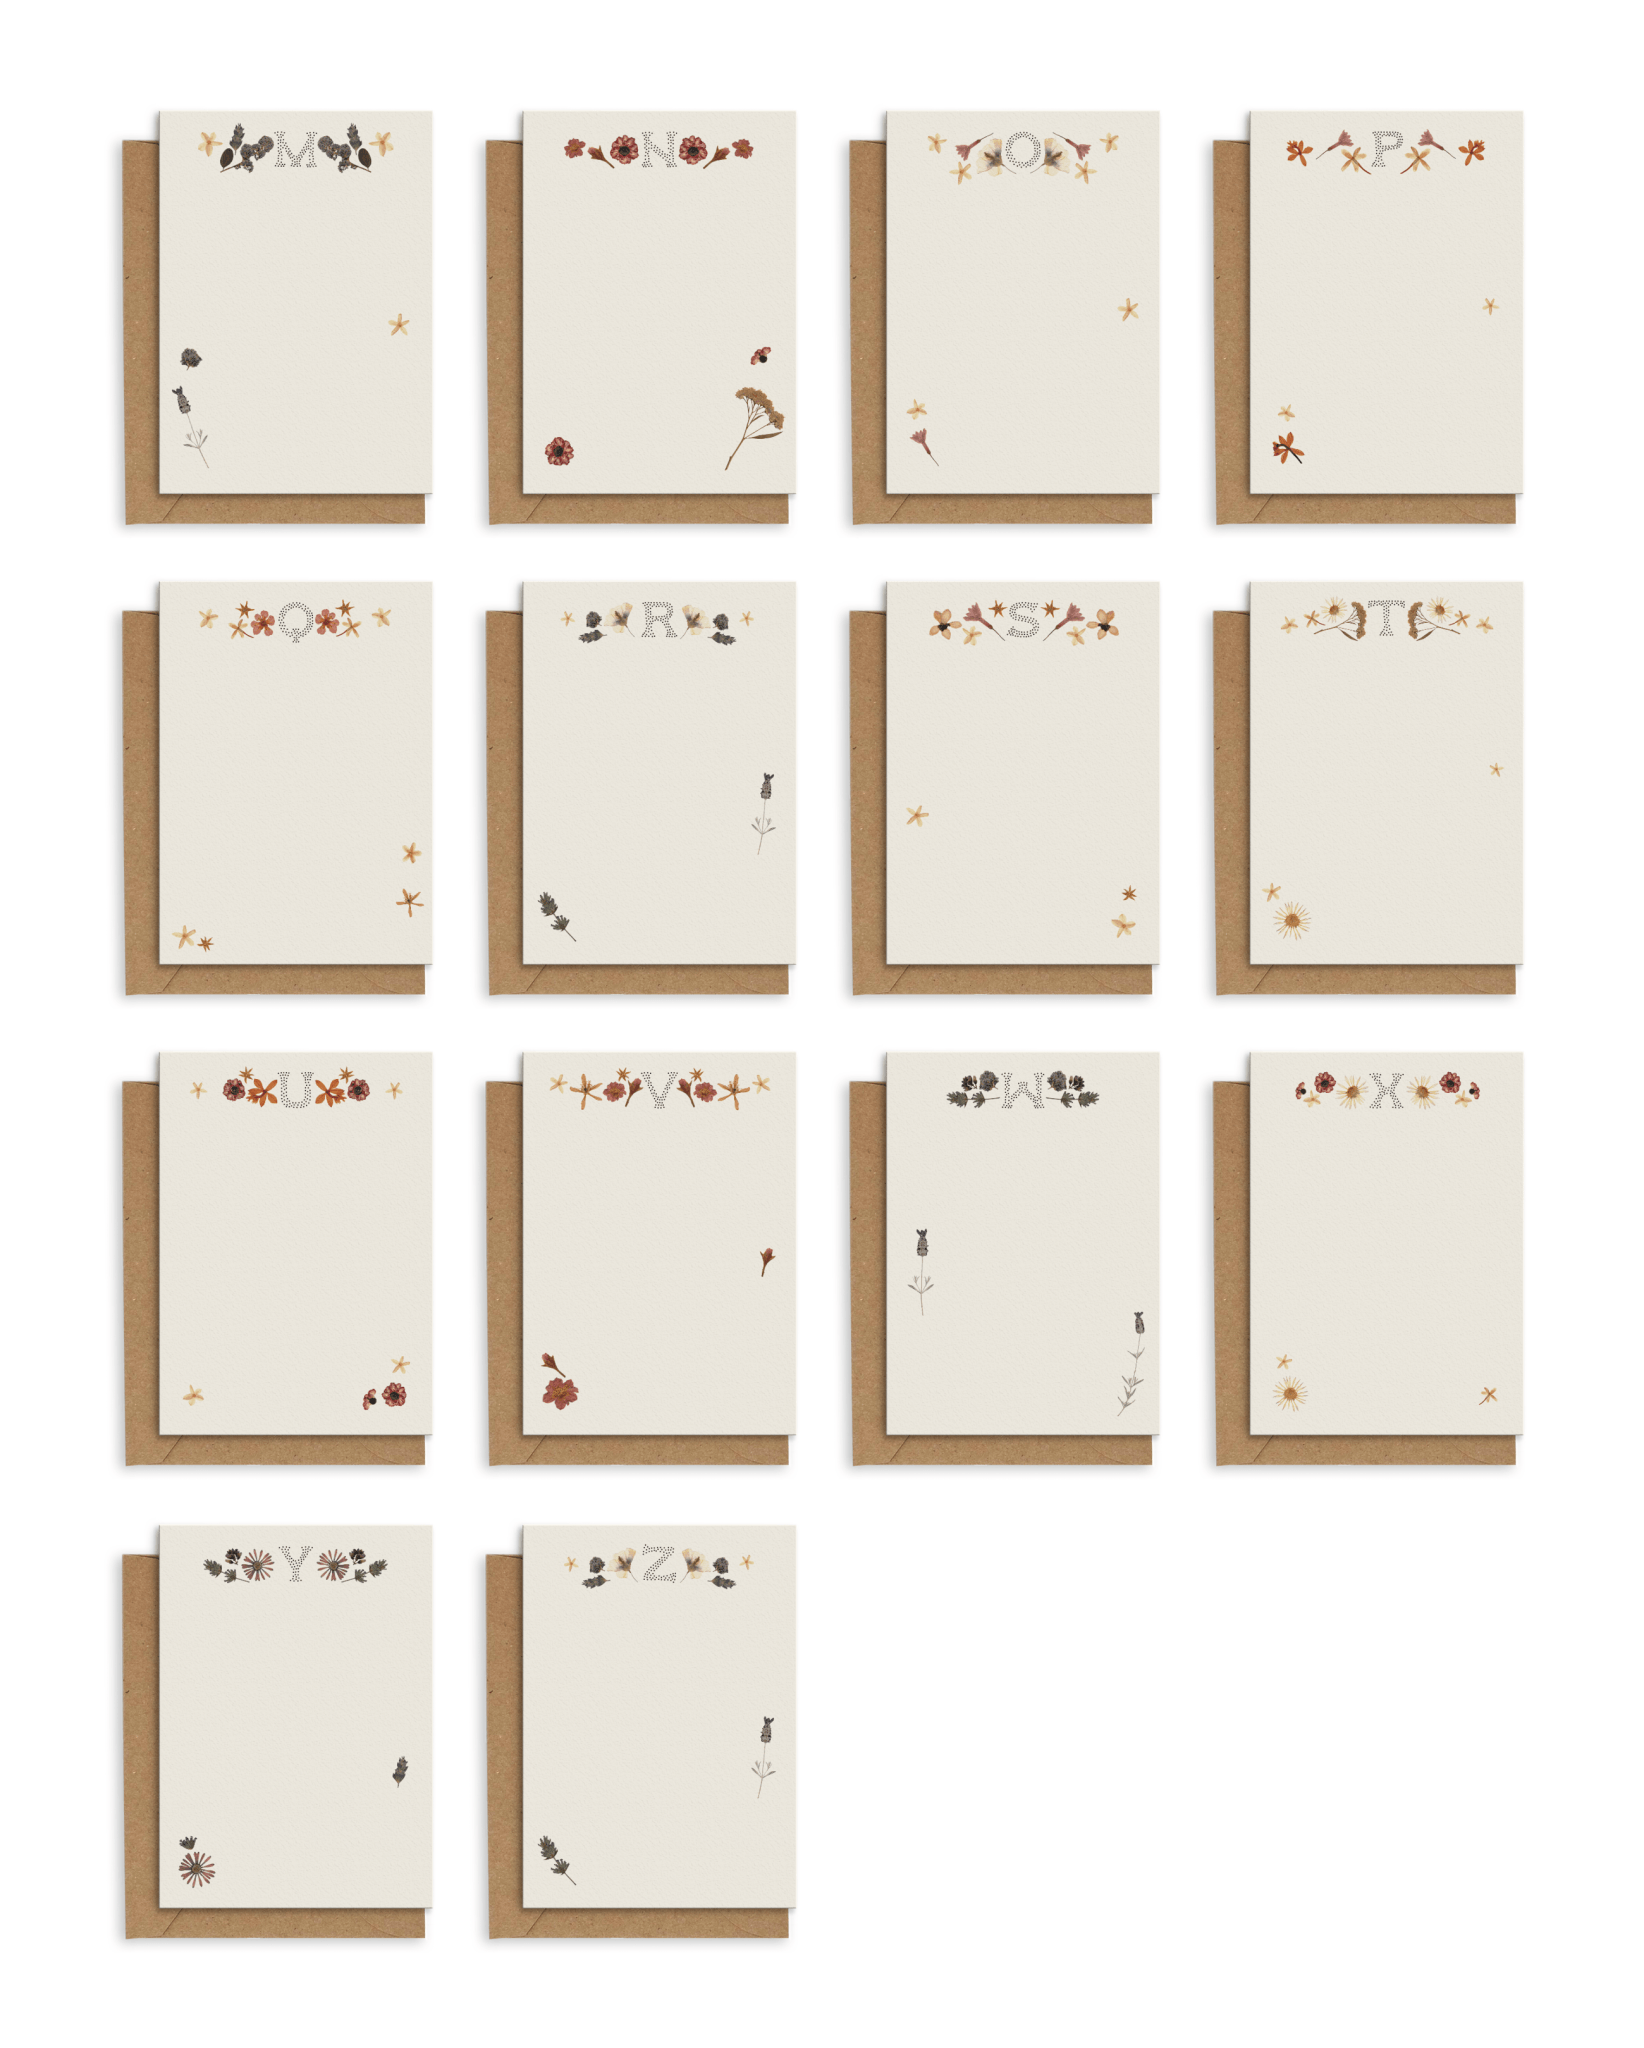 Adelfi monogram notecards featuring letters "M" through "Z" with kraft envelopes on a white background.